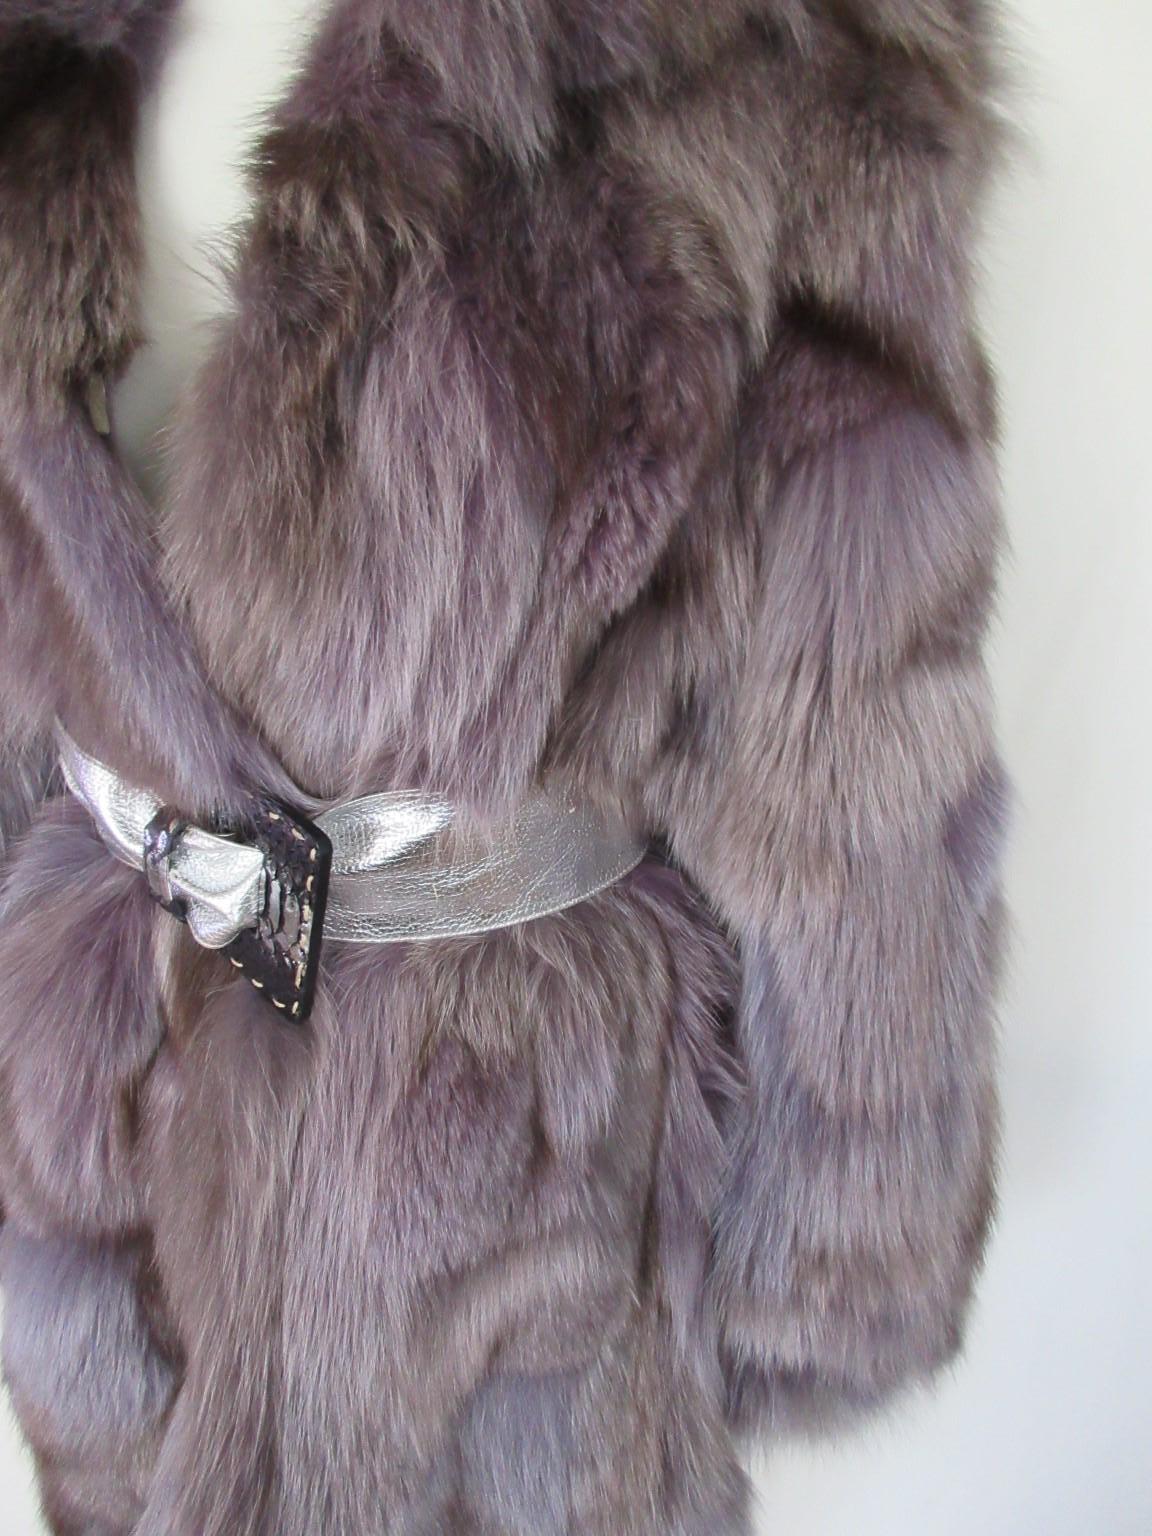 Beautiful purple/taupe/violet dyed fox fur coat, rare to find

We offer more exclusive fur items, view our frontstore

Details:
Soft fox fur
very light and supple
2 pockets and 3 closing hooks.
fully lined
Can be worn by men or women.
Belt is not